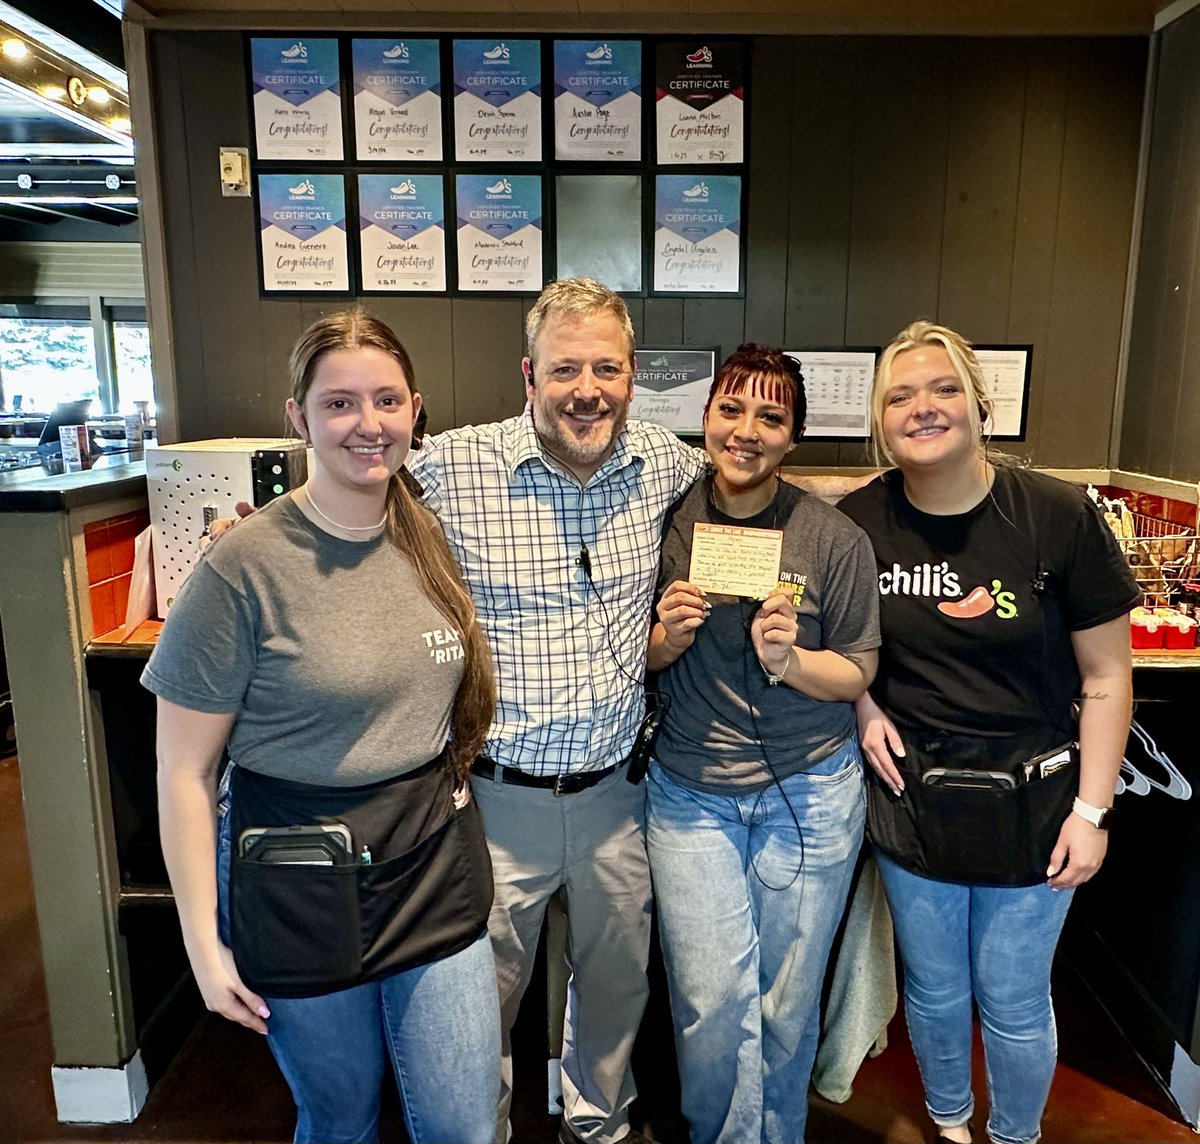 ATLs for the squad @Chilis Oswego! John coming in clutch when the HOH is short handed, and Nyomi being a swiss army knife and doing it ALL! Showing us what #BeAccountable is all about! #chilislove @GumpMike @NicholasBPaxton @LynAj4 @train3rgirl @devashspeno @KenzieStafford